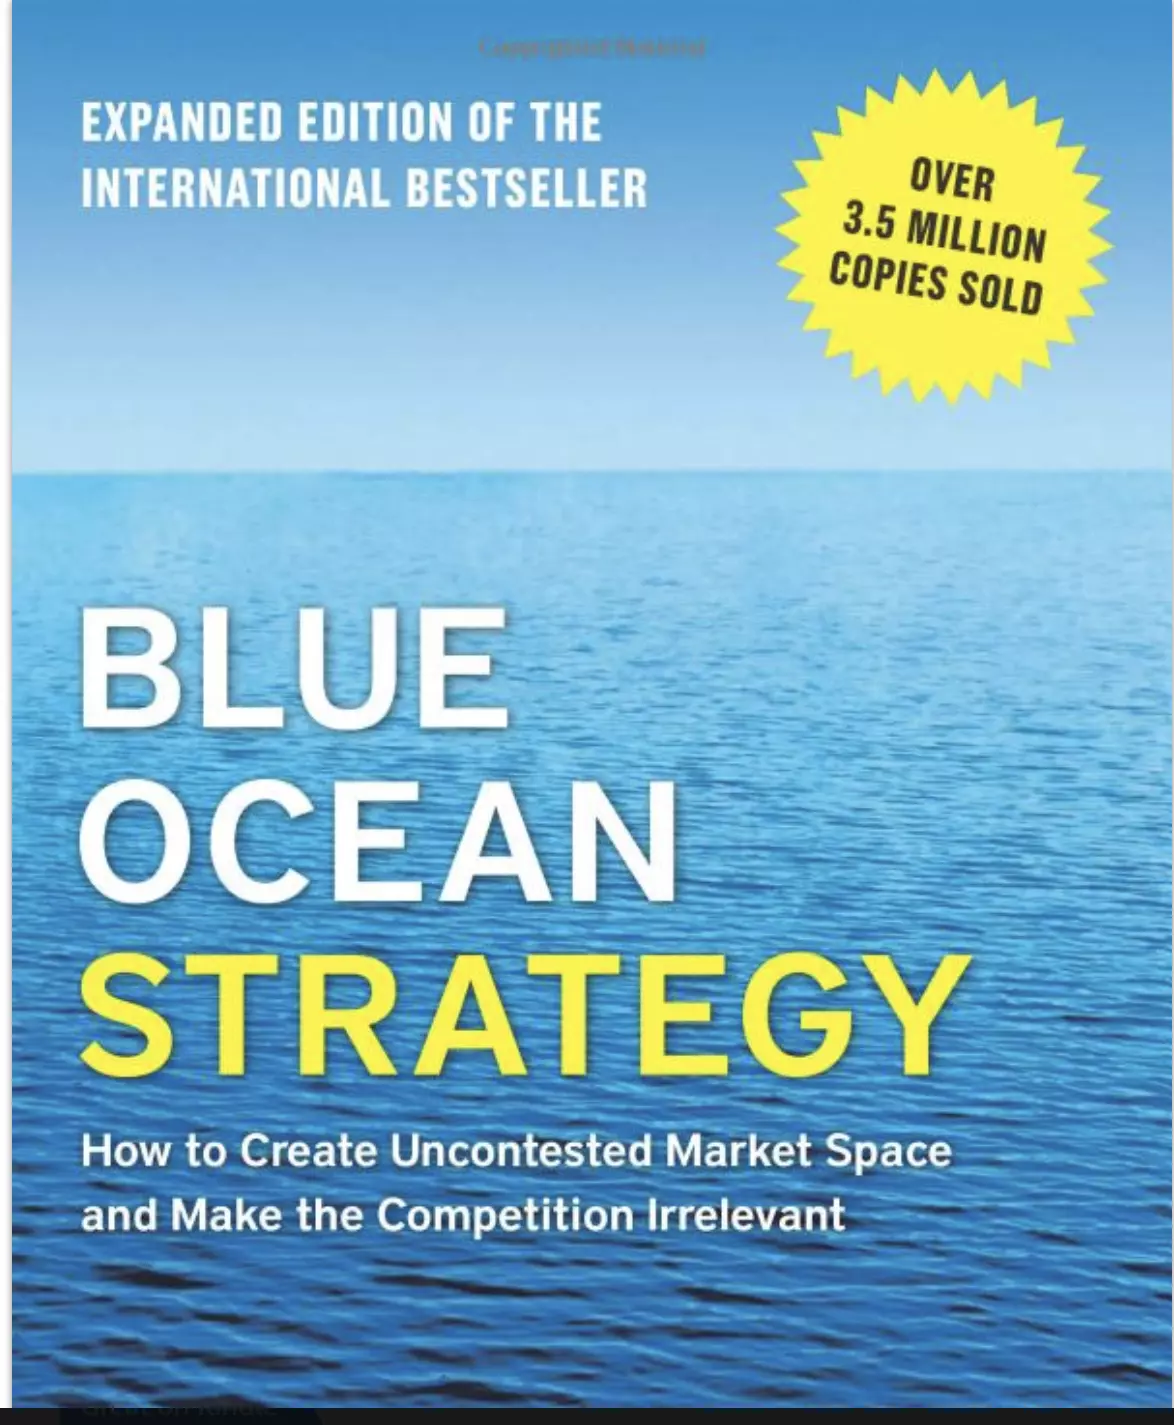 Blue ocean strategy, expanded edition